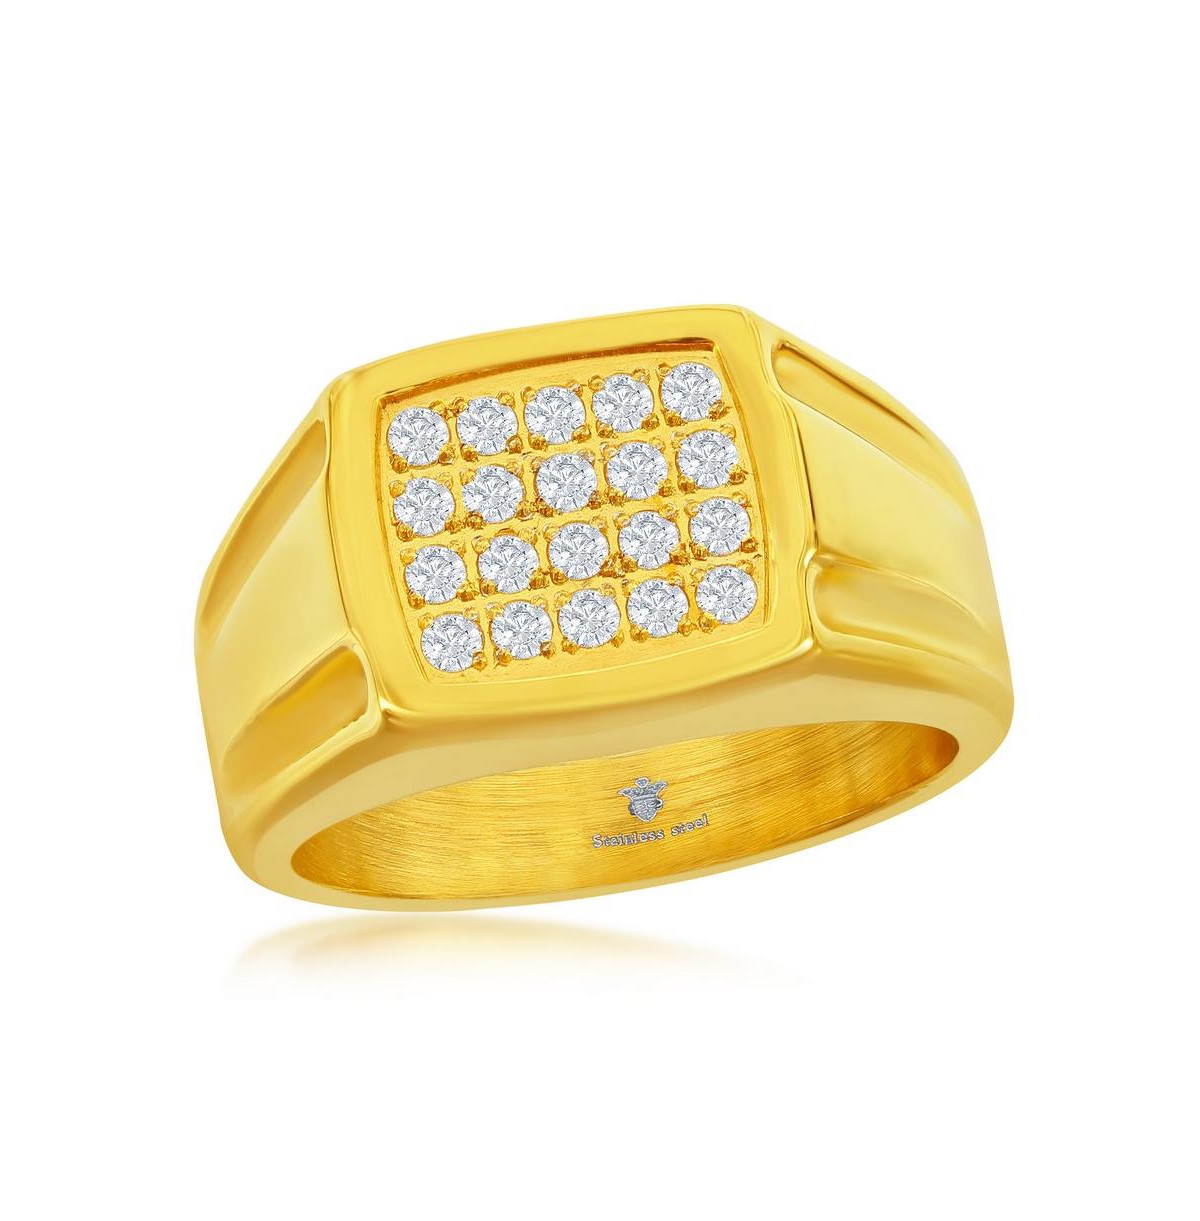 BLACKJACK MENS STAINLESS STEEL CZ SQUARE RING - GOLD PLATED